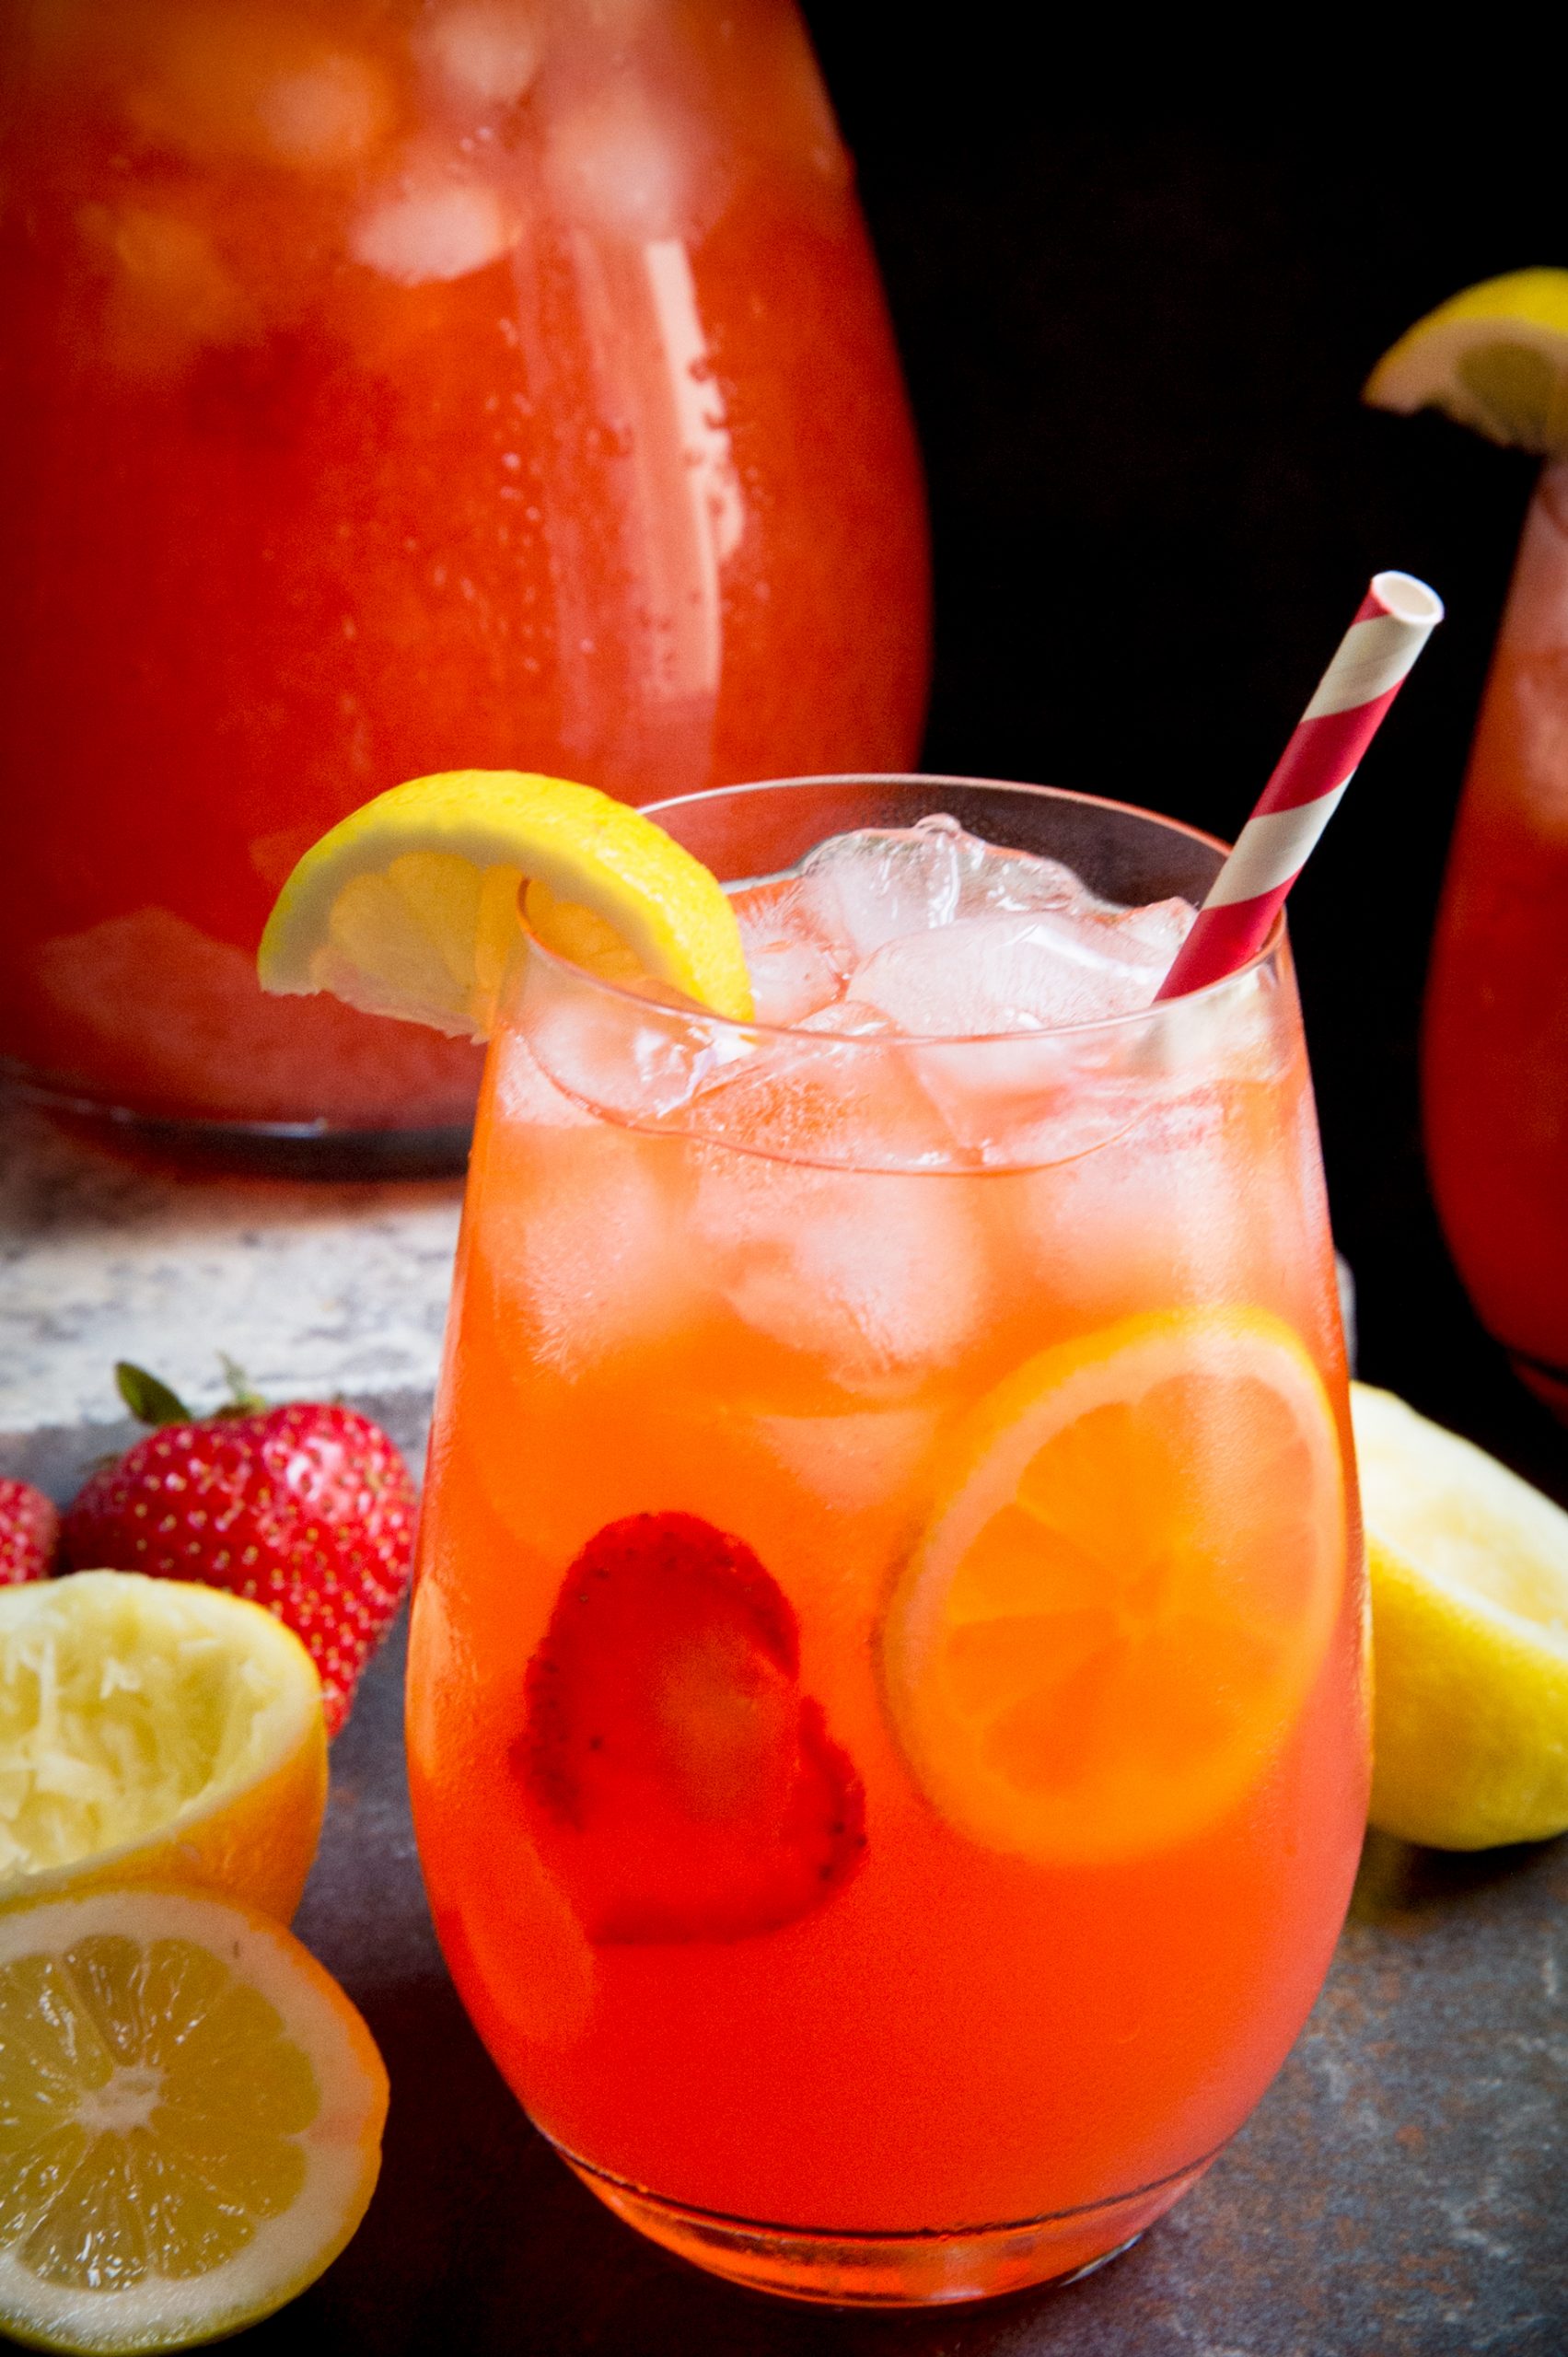 Glass of sugar-free strawberry lemonade in front of pitcher